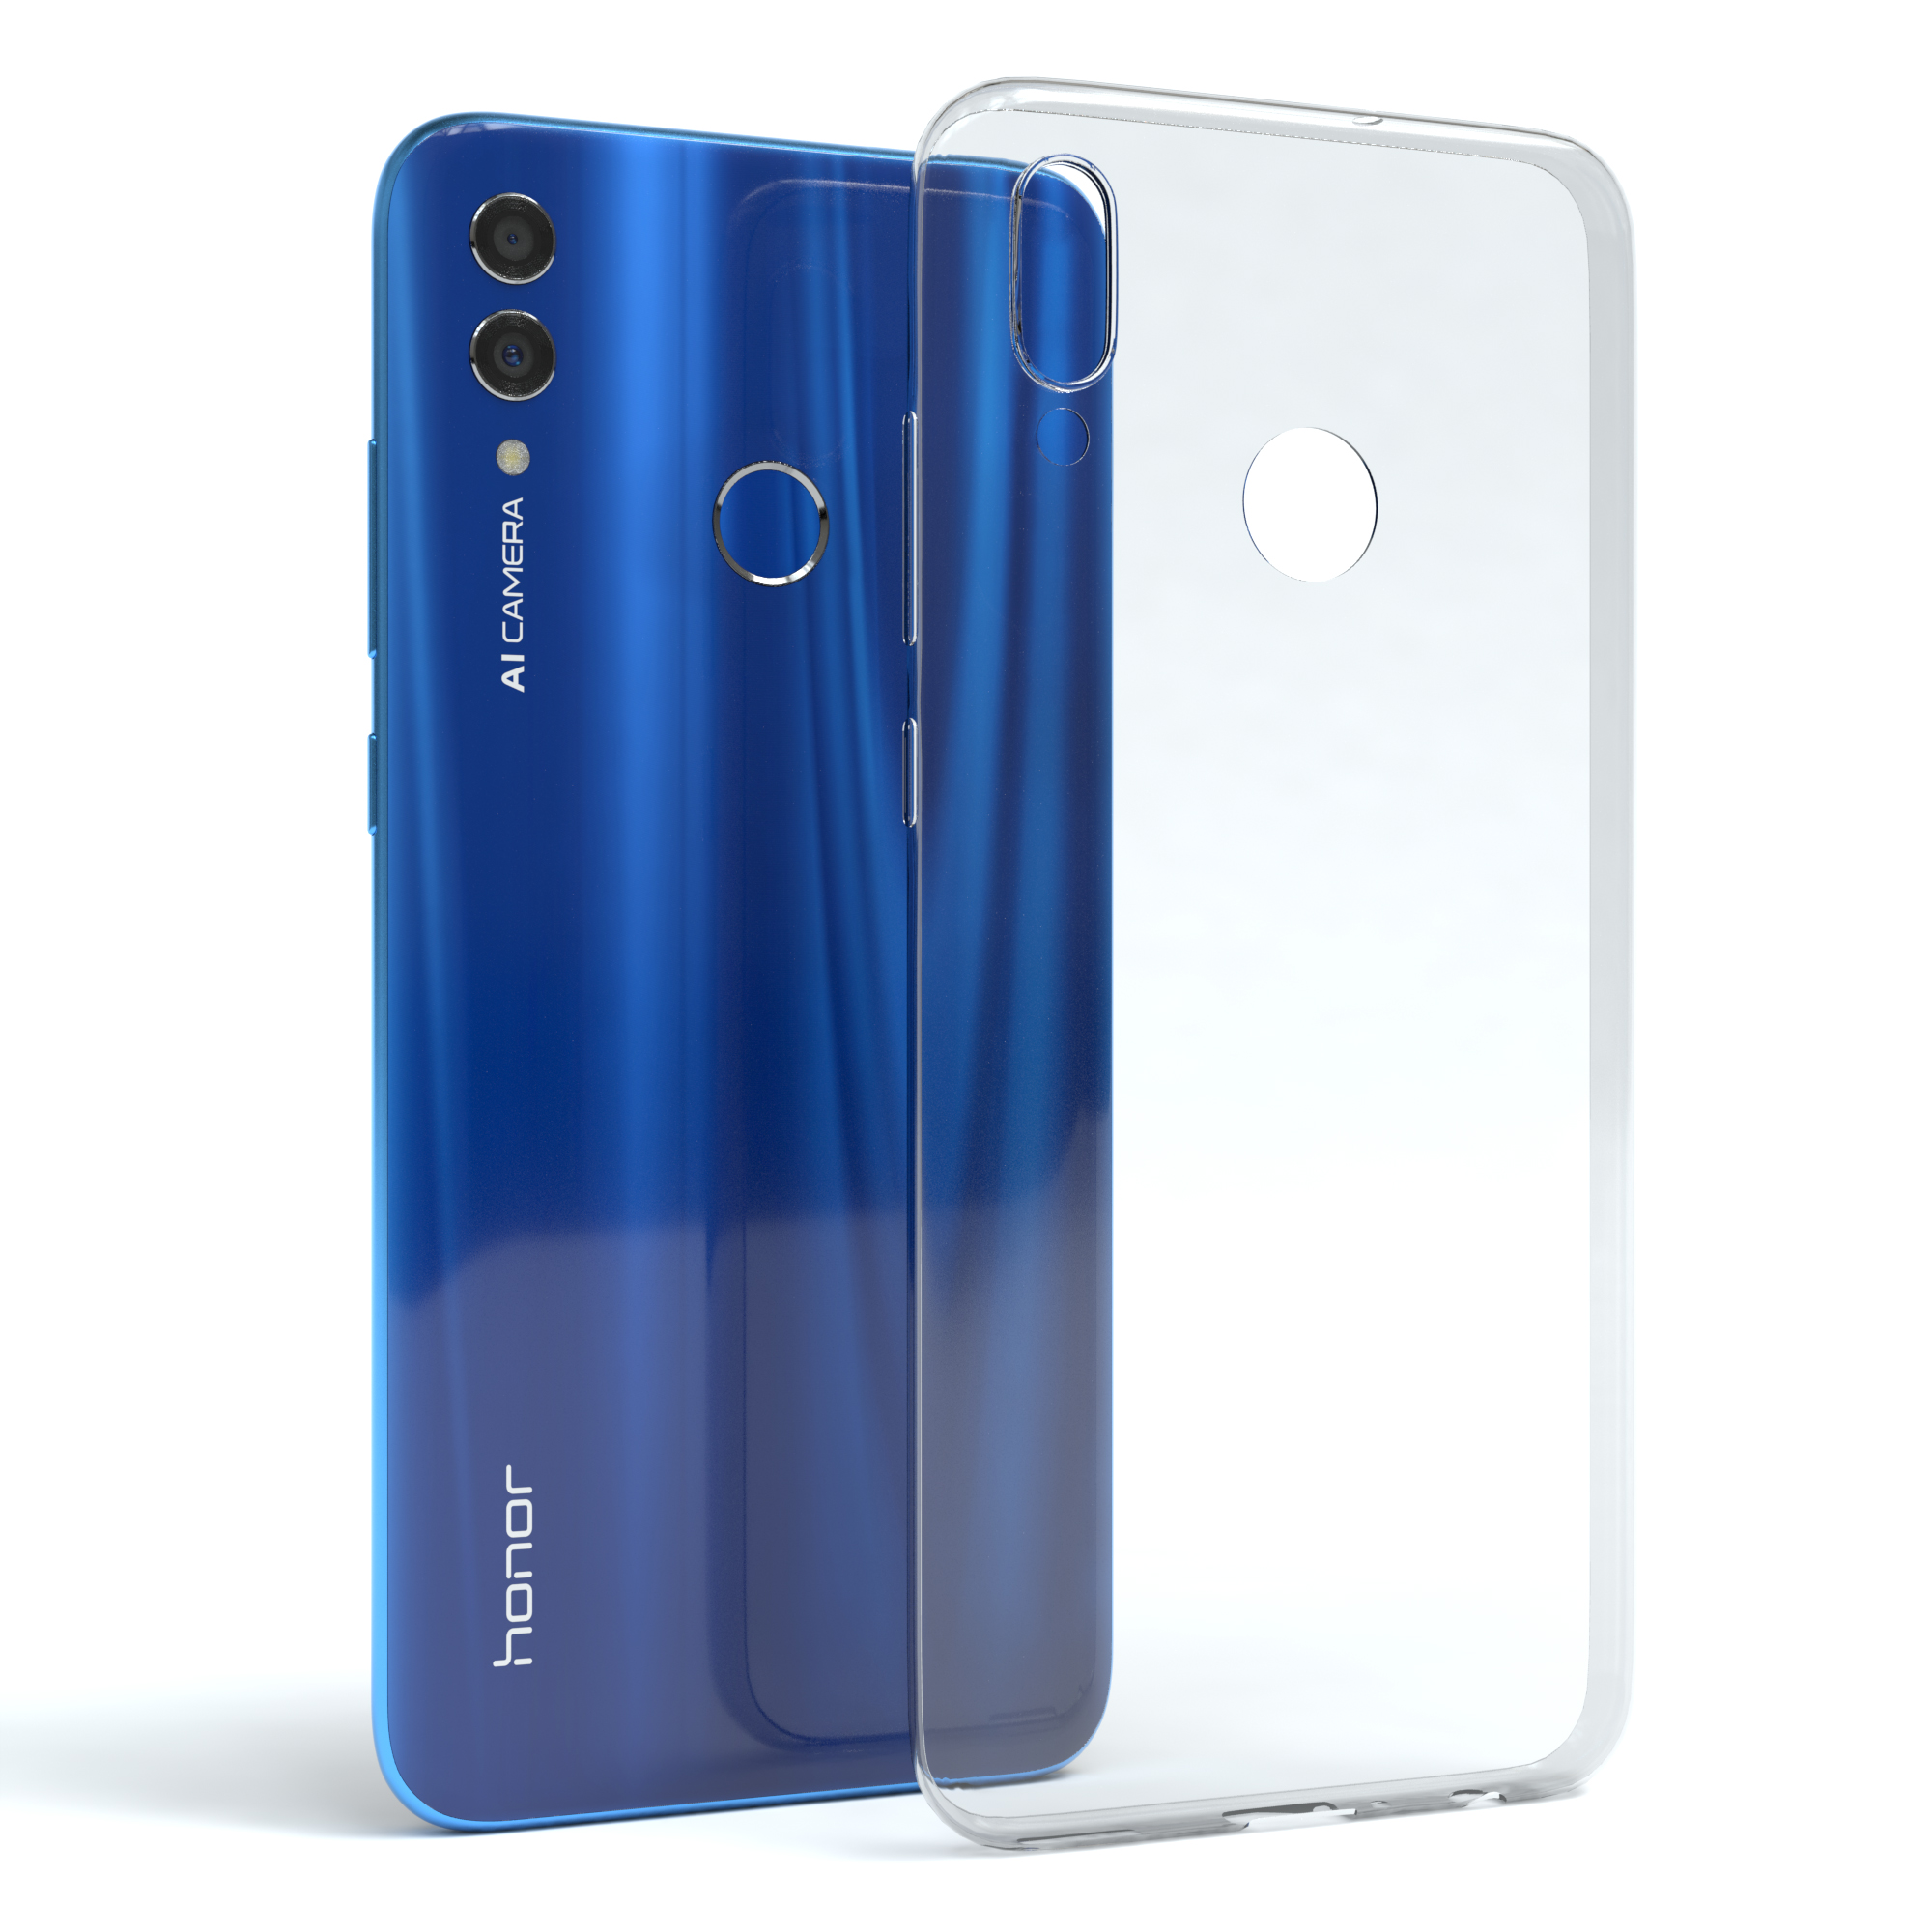 EAZY CASE Slimcover Clear, Huawei, Durchsichtig 10 Backcover, Honor Lite